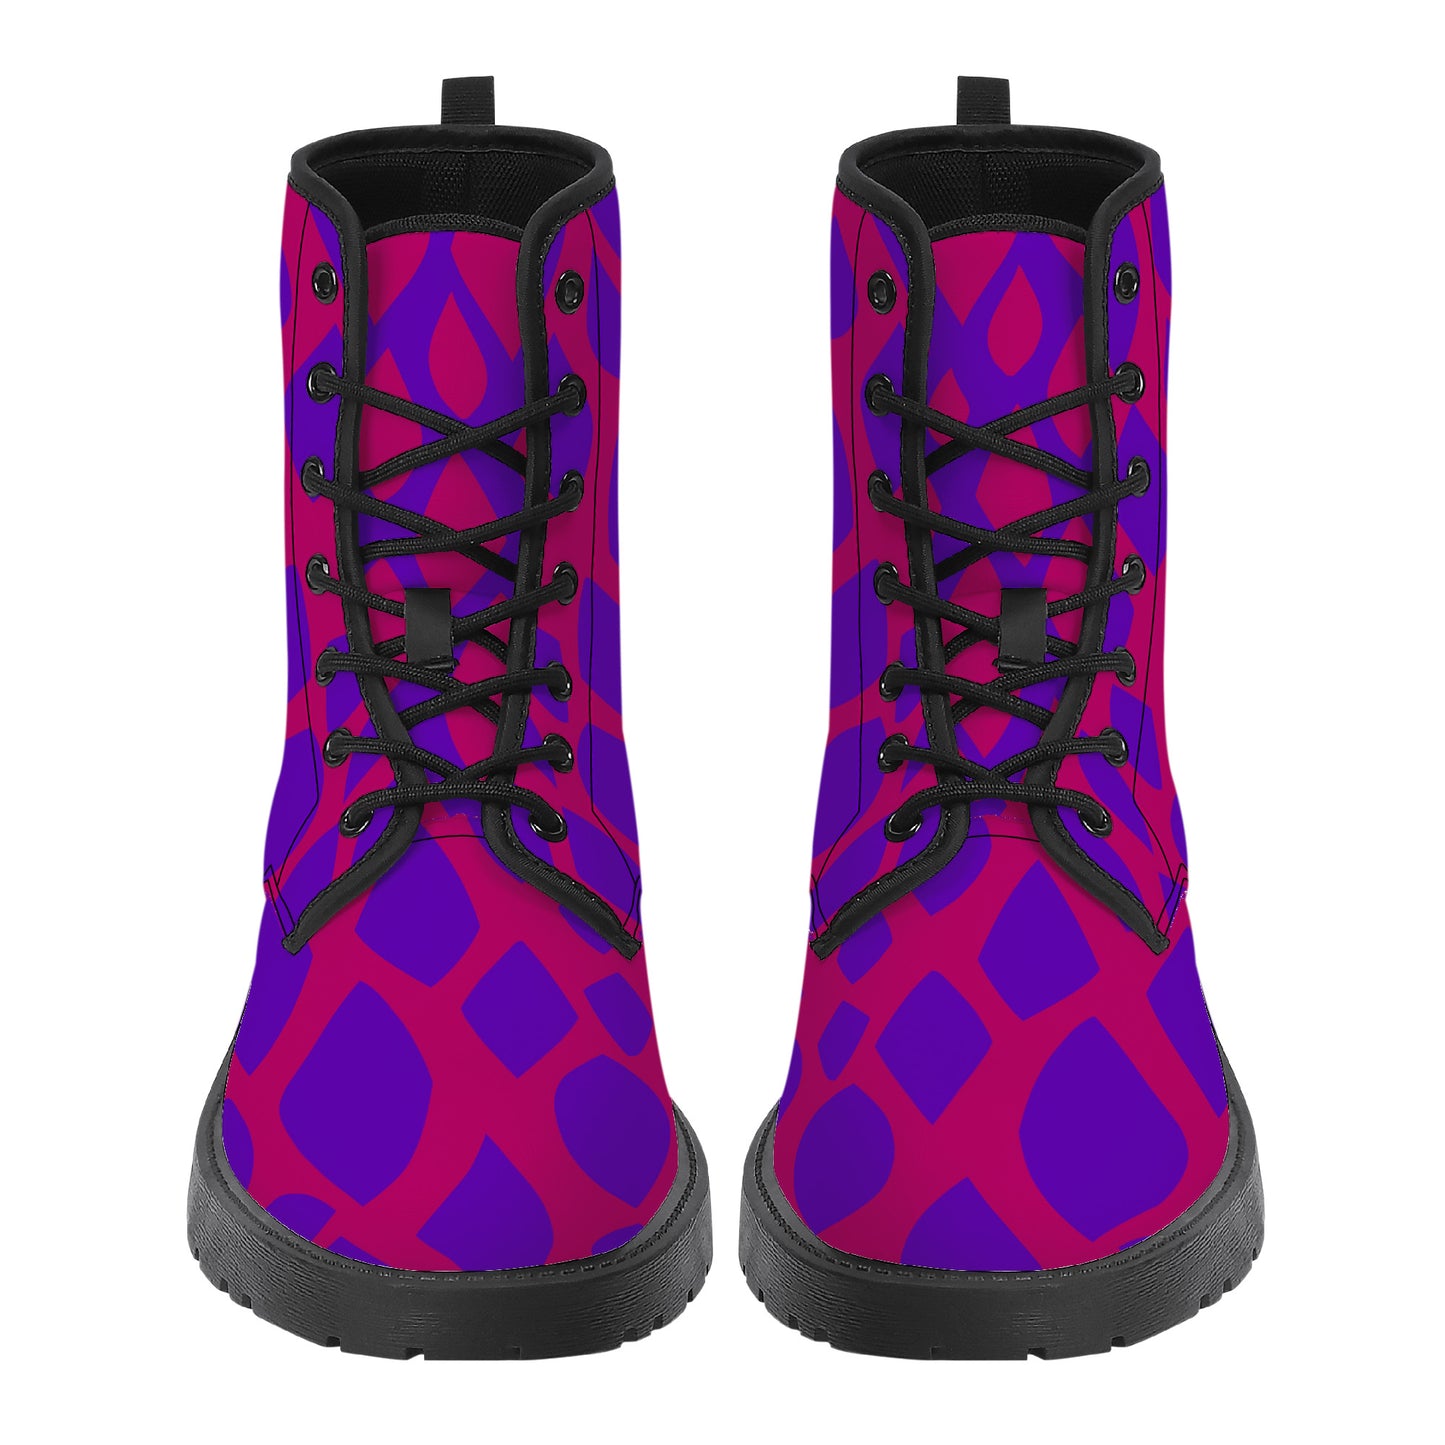 "Snake" Eco-friendly Boots